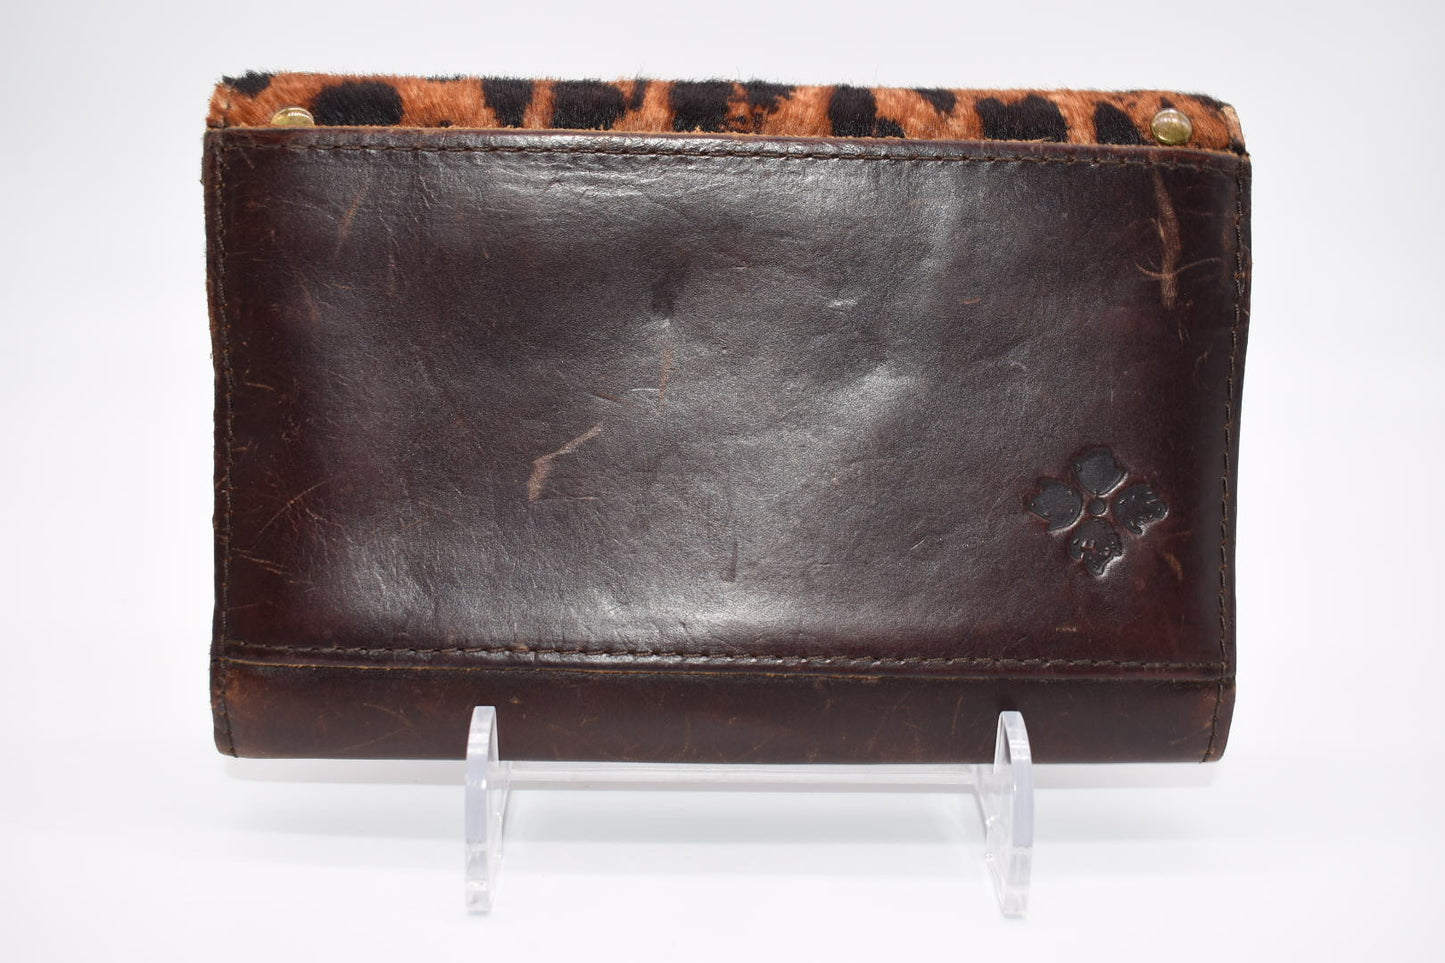 Patricia Nash Colli Wallet in Studded Leopard